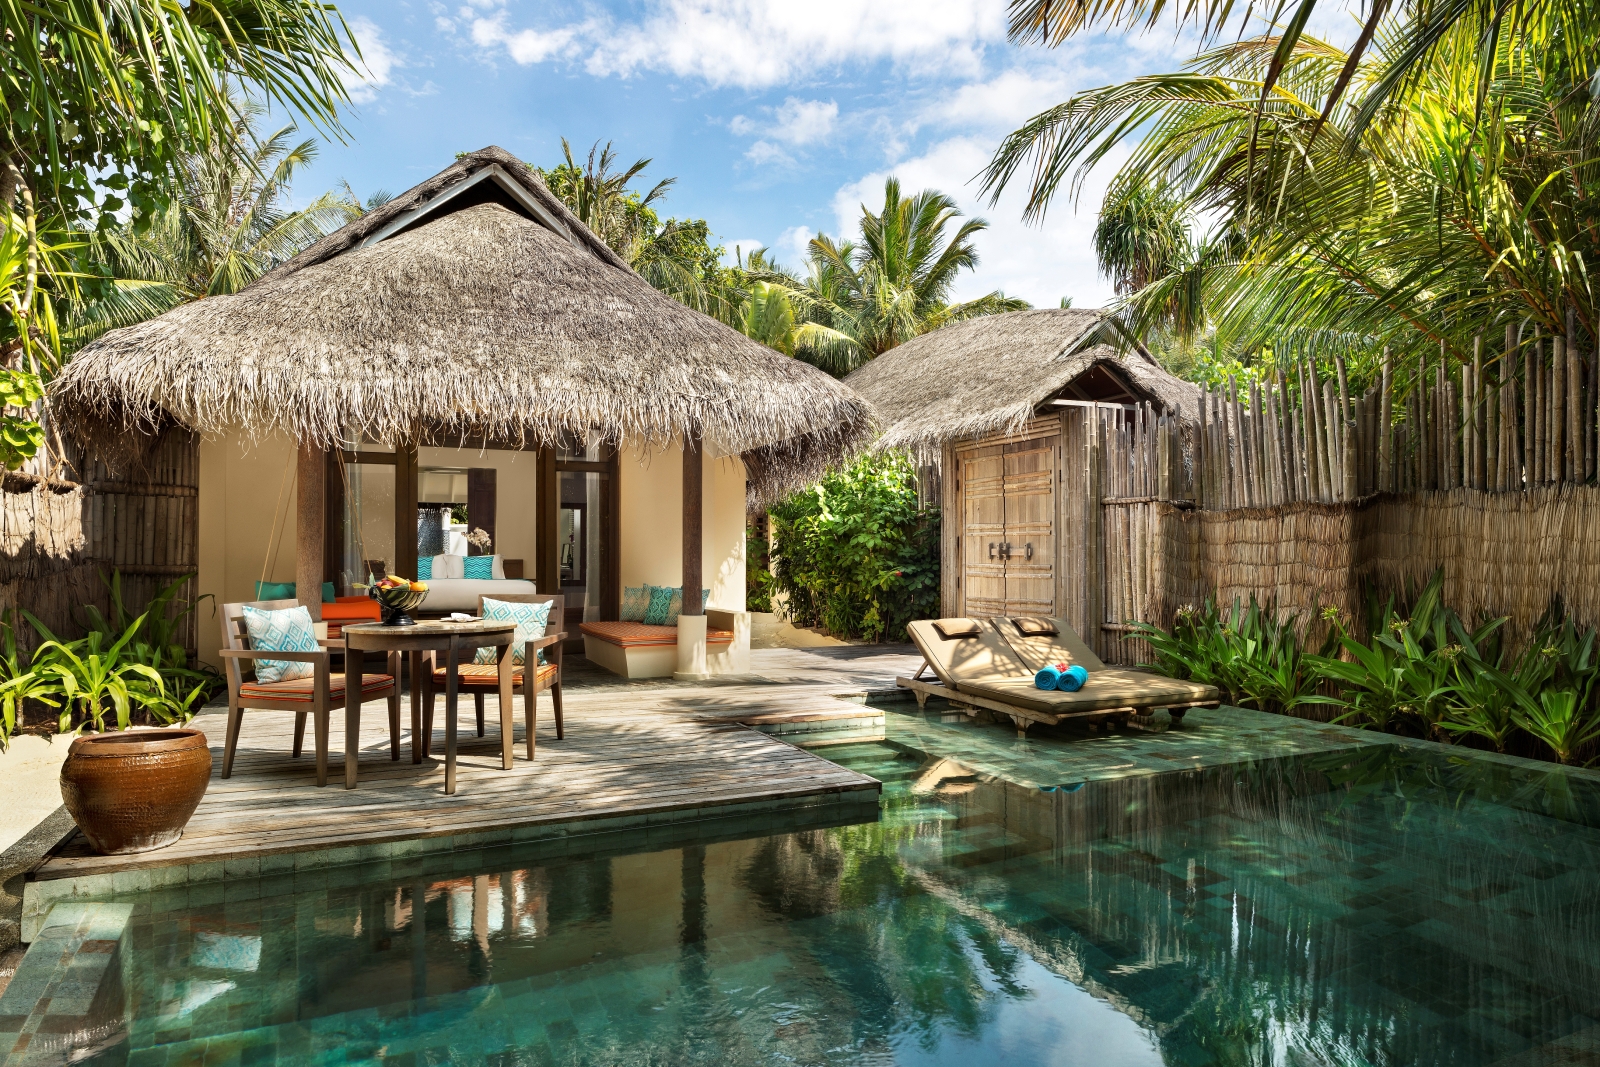 exterior of a Family Suite with private pool at luxury resort Anantara Dhigu in the Maldives